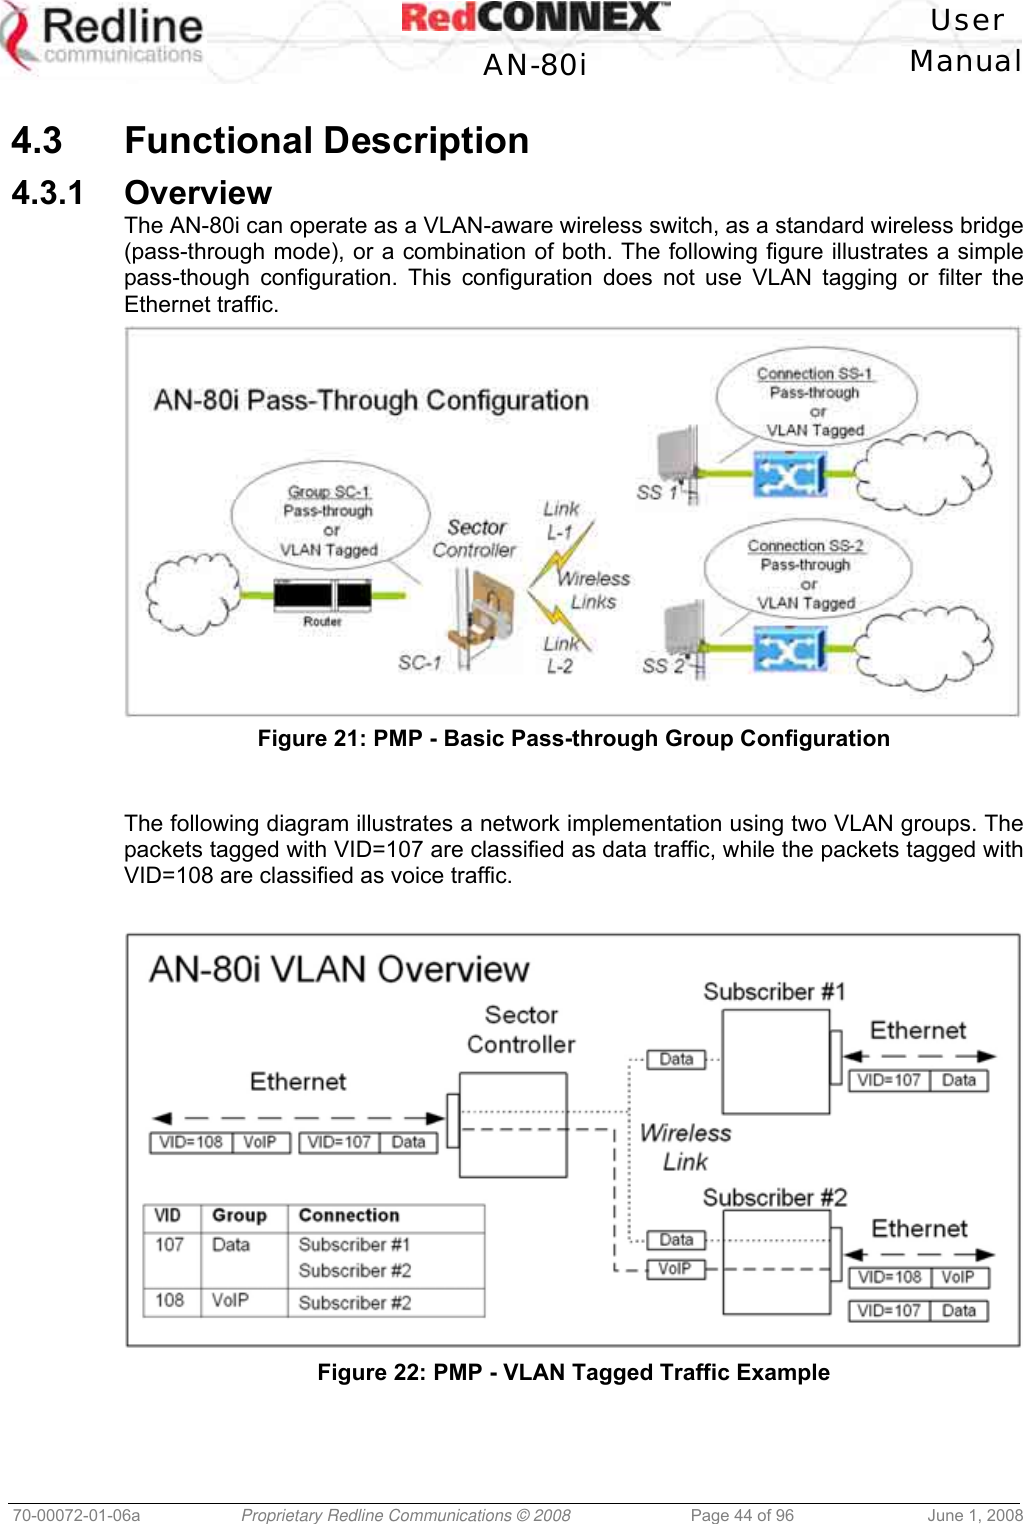   User  AN-80i Manual  70-00072-01-06a  Proprietary Redline Communications © 2008  Page 44 of 96  June 1, 2008  4.3 Functional Description 4.3.1 Overview The AN-80i can operate as a VLAN-aware wireless switch, as a standard wireless bridge (pass-through mode), or a combination of both. The following figure illustrates a simple pass-though configuration. This configuration does not use VLAN tagging or filter the Ethernet traffic.  Figure 21: PMP - Basic Pass-through Group Configuration   The following diagram illustrates a network implementation using two VLAN groups. The packets tagged with VID=107 are classified as data traffic, while the packets tagged with VID=108 are classified as voice traffic.    Figure 22: PMP - VLAN Tagged Traffic Example   